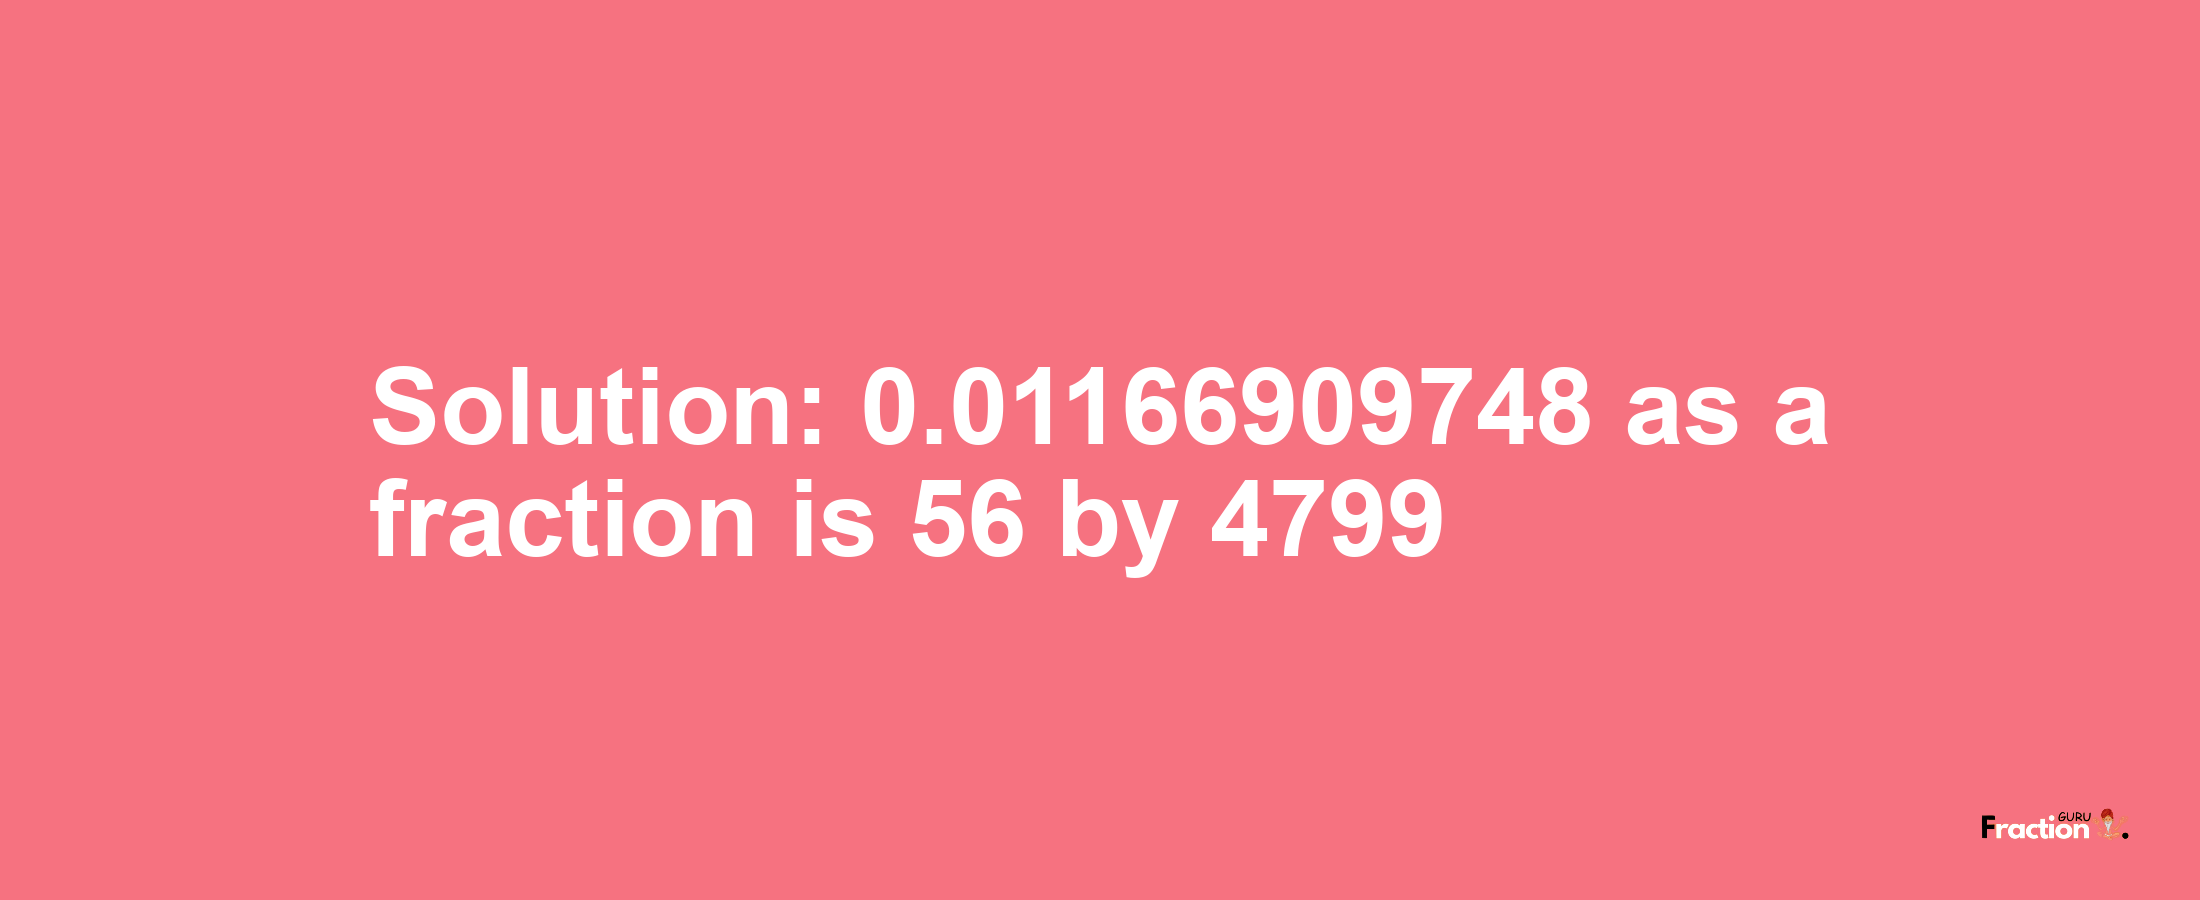 Solution:0.01166909748 as a fraction is 56/4799